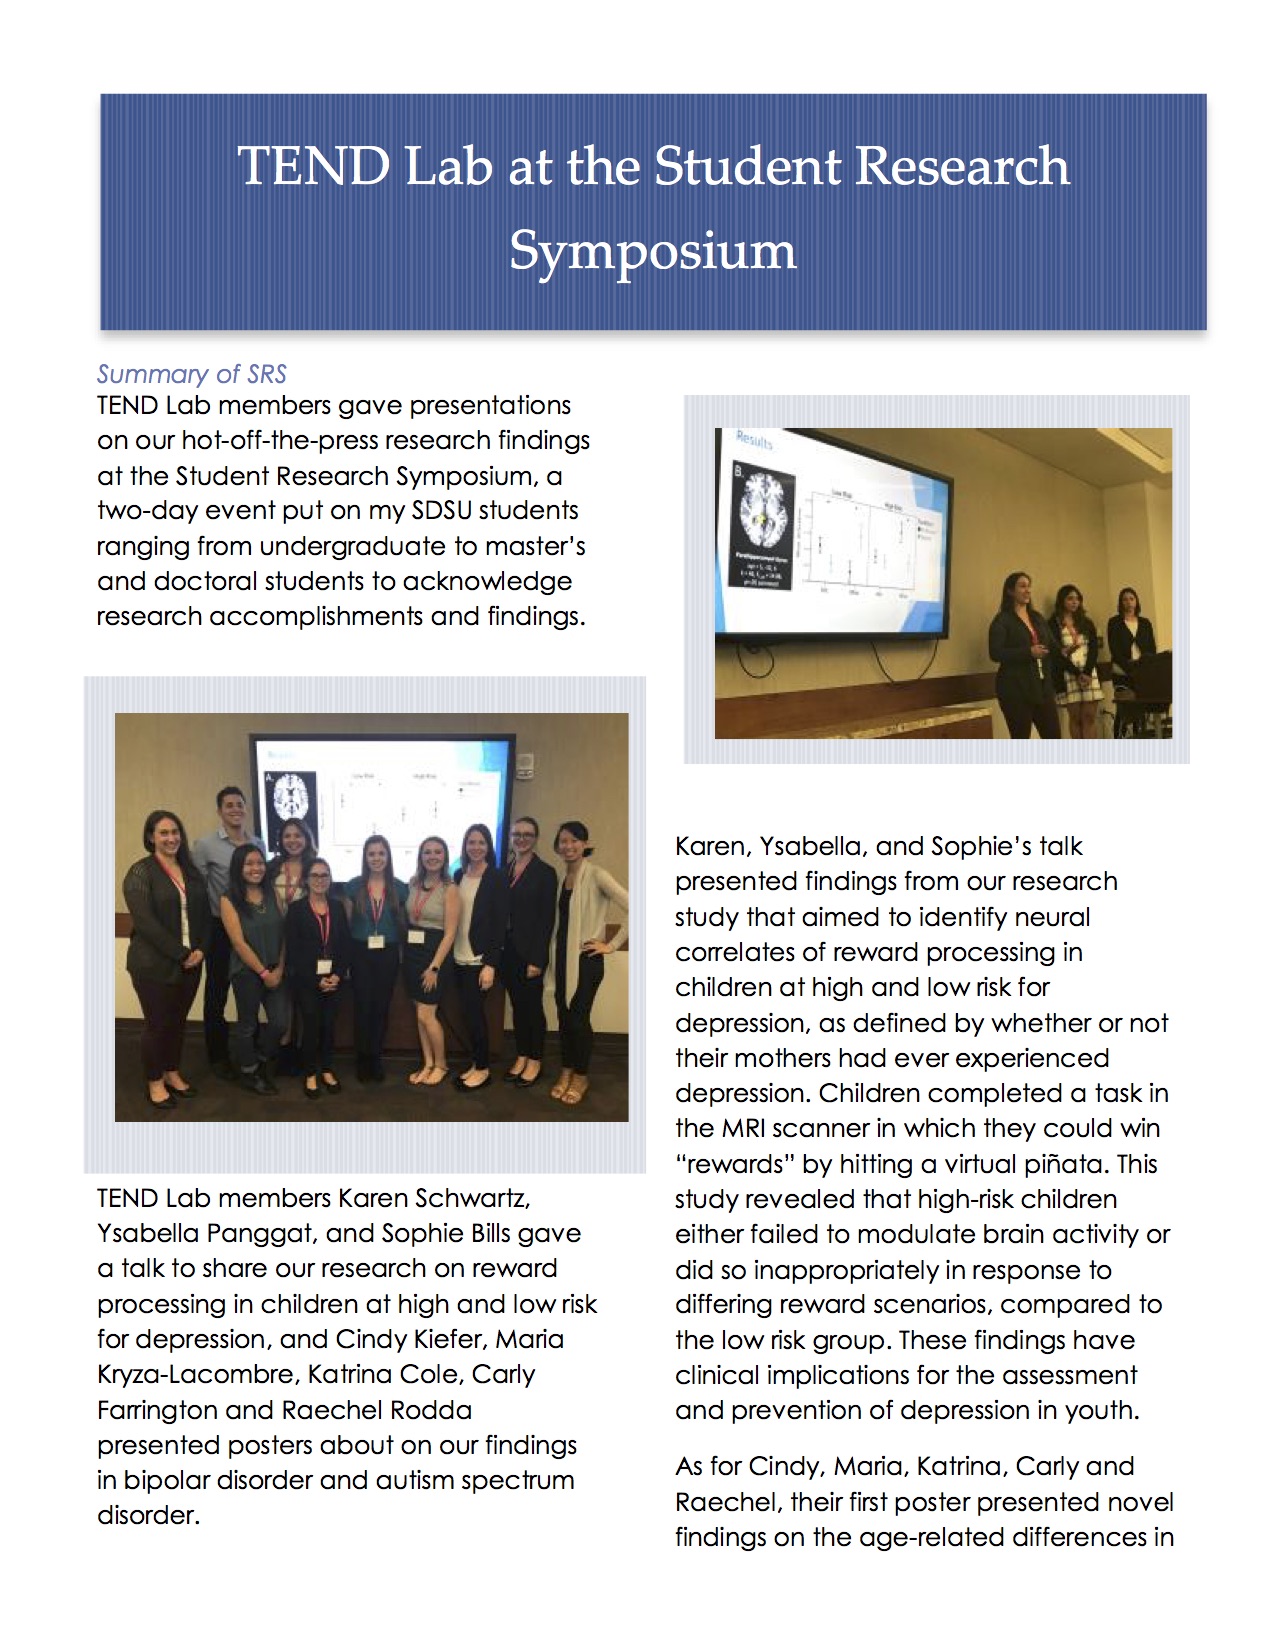 Student Research Symposium article page 1 titled "TEND Lab at Student Research Symposium"